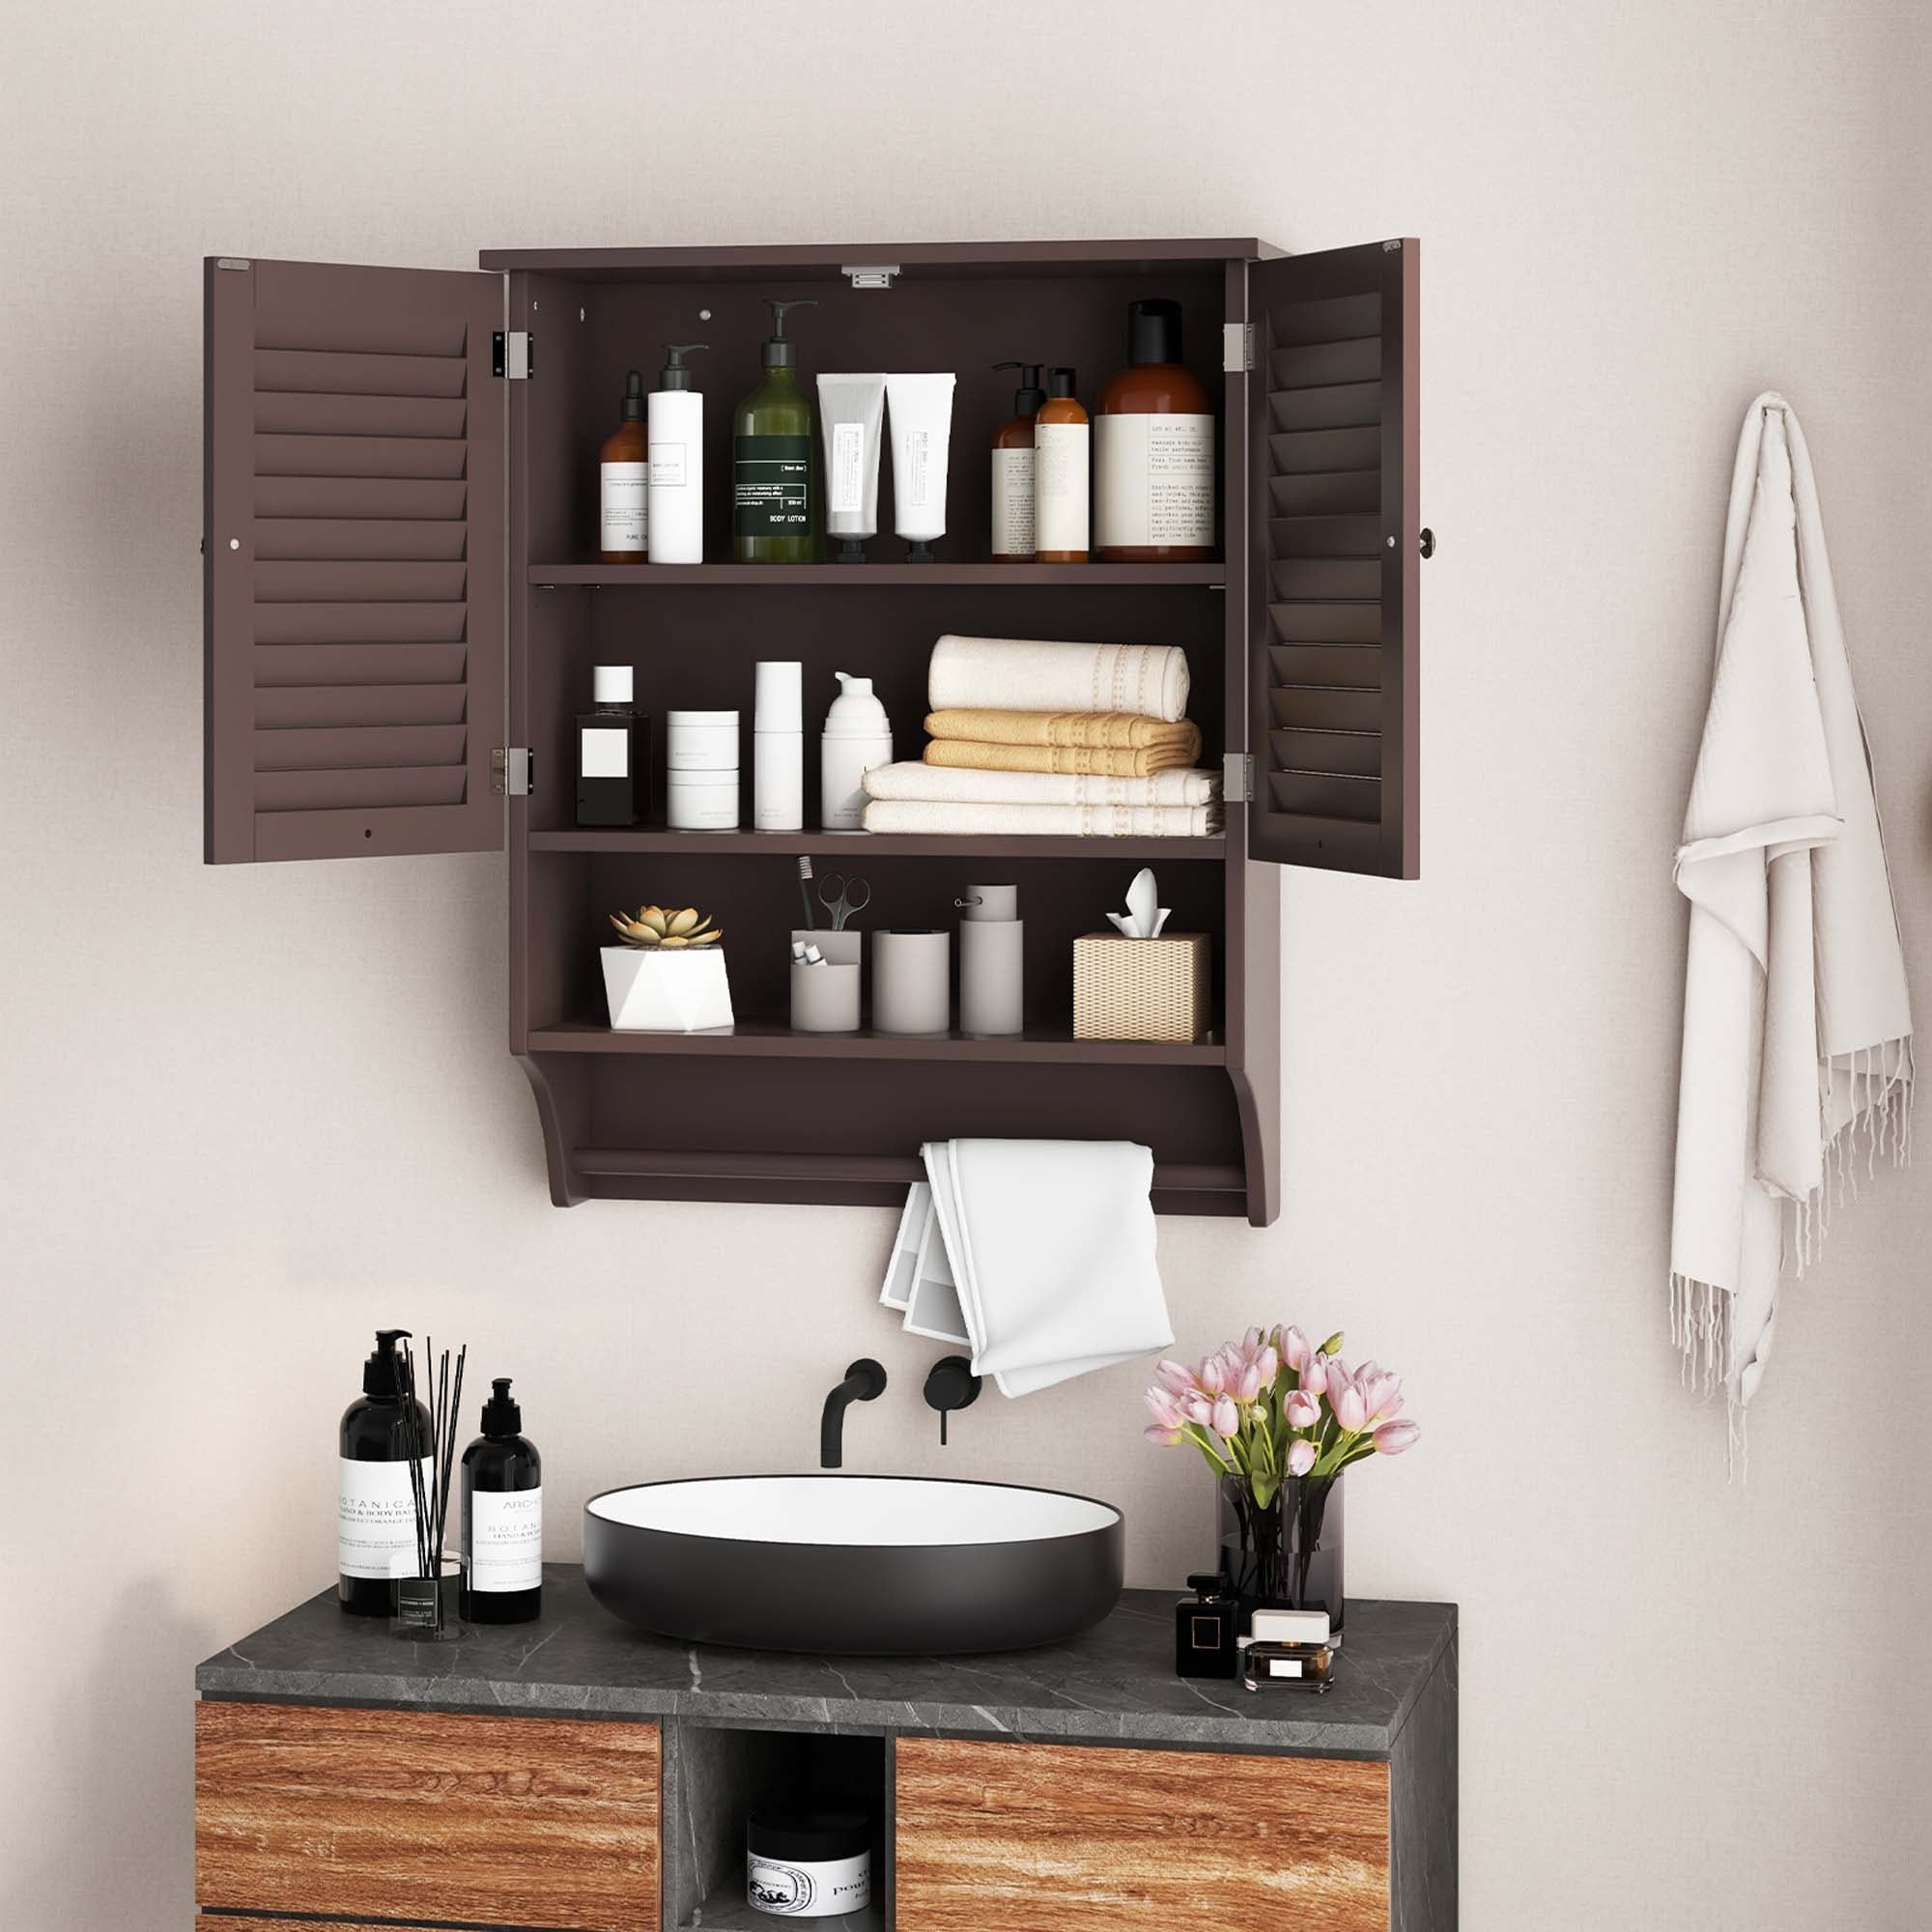 https://ak1.ostkcdn.com/images/products/is/images/direct/65d832c7d180f6f9217b539d00970dc65432c14d/Costway-Bathroom-Wall-Mounted-Medicine-Cabinet-with-Louvered-Doors-%26.jpg